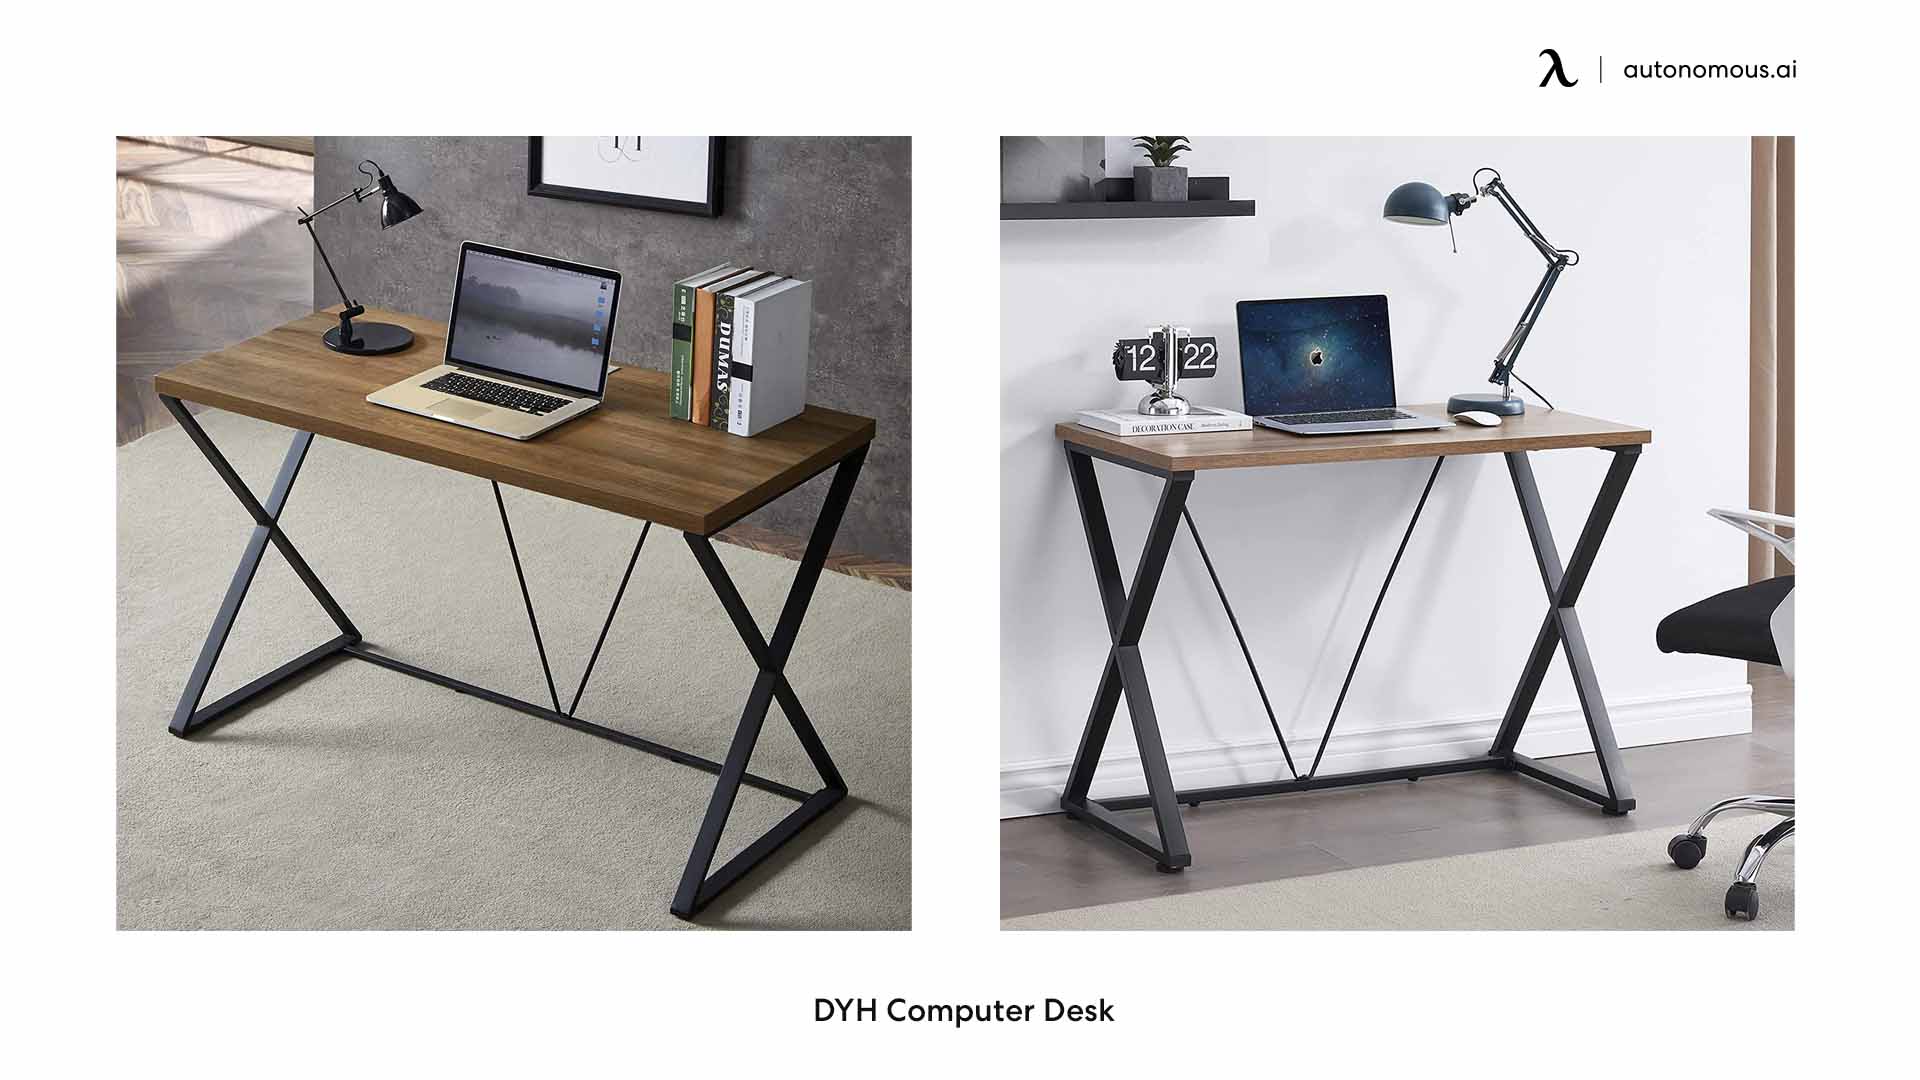 DYH's wood and metal desk